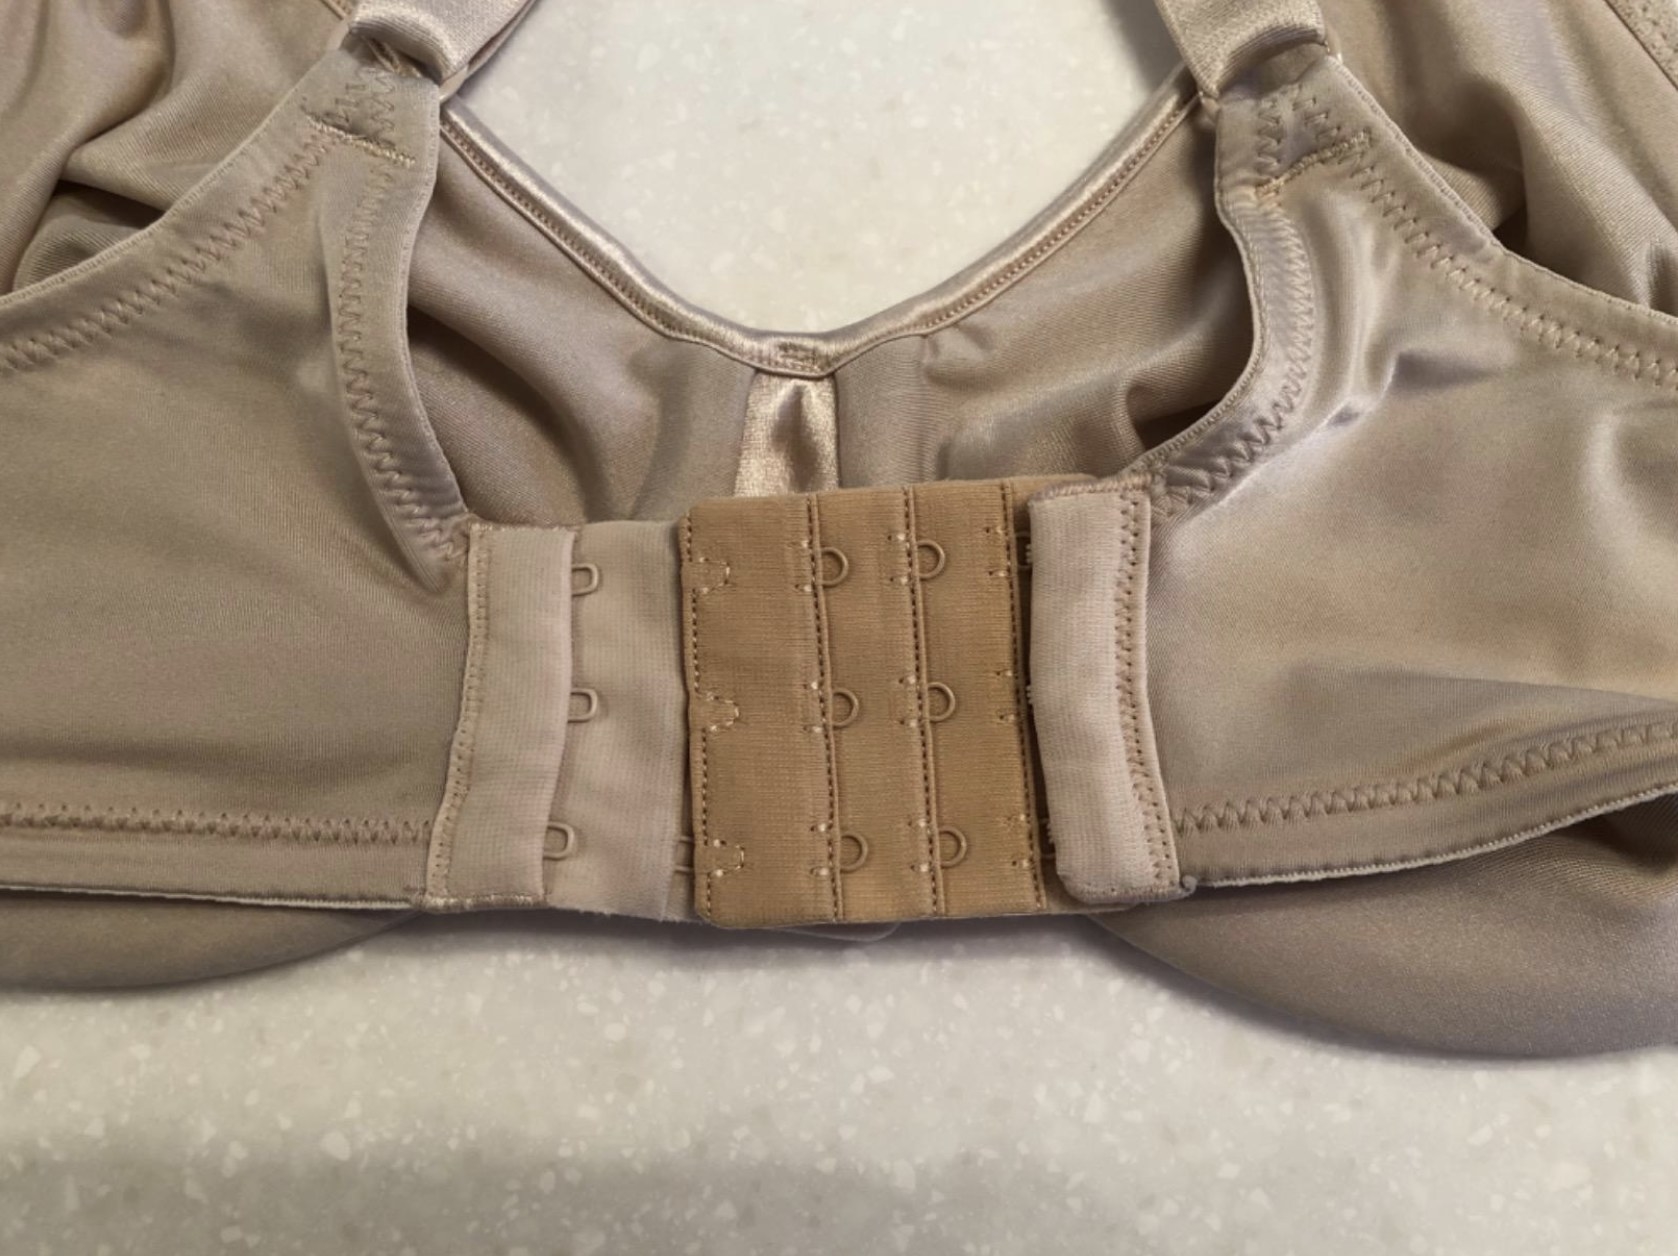 reviewer photo showing the bra extender on their bra